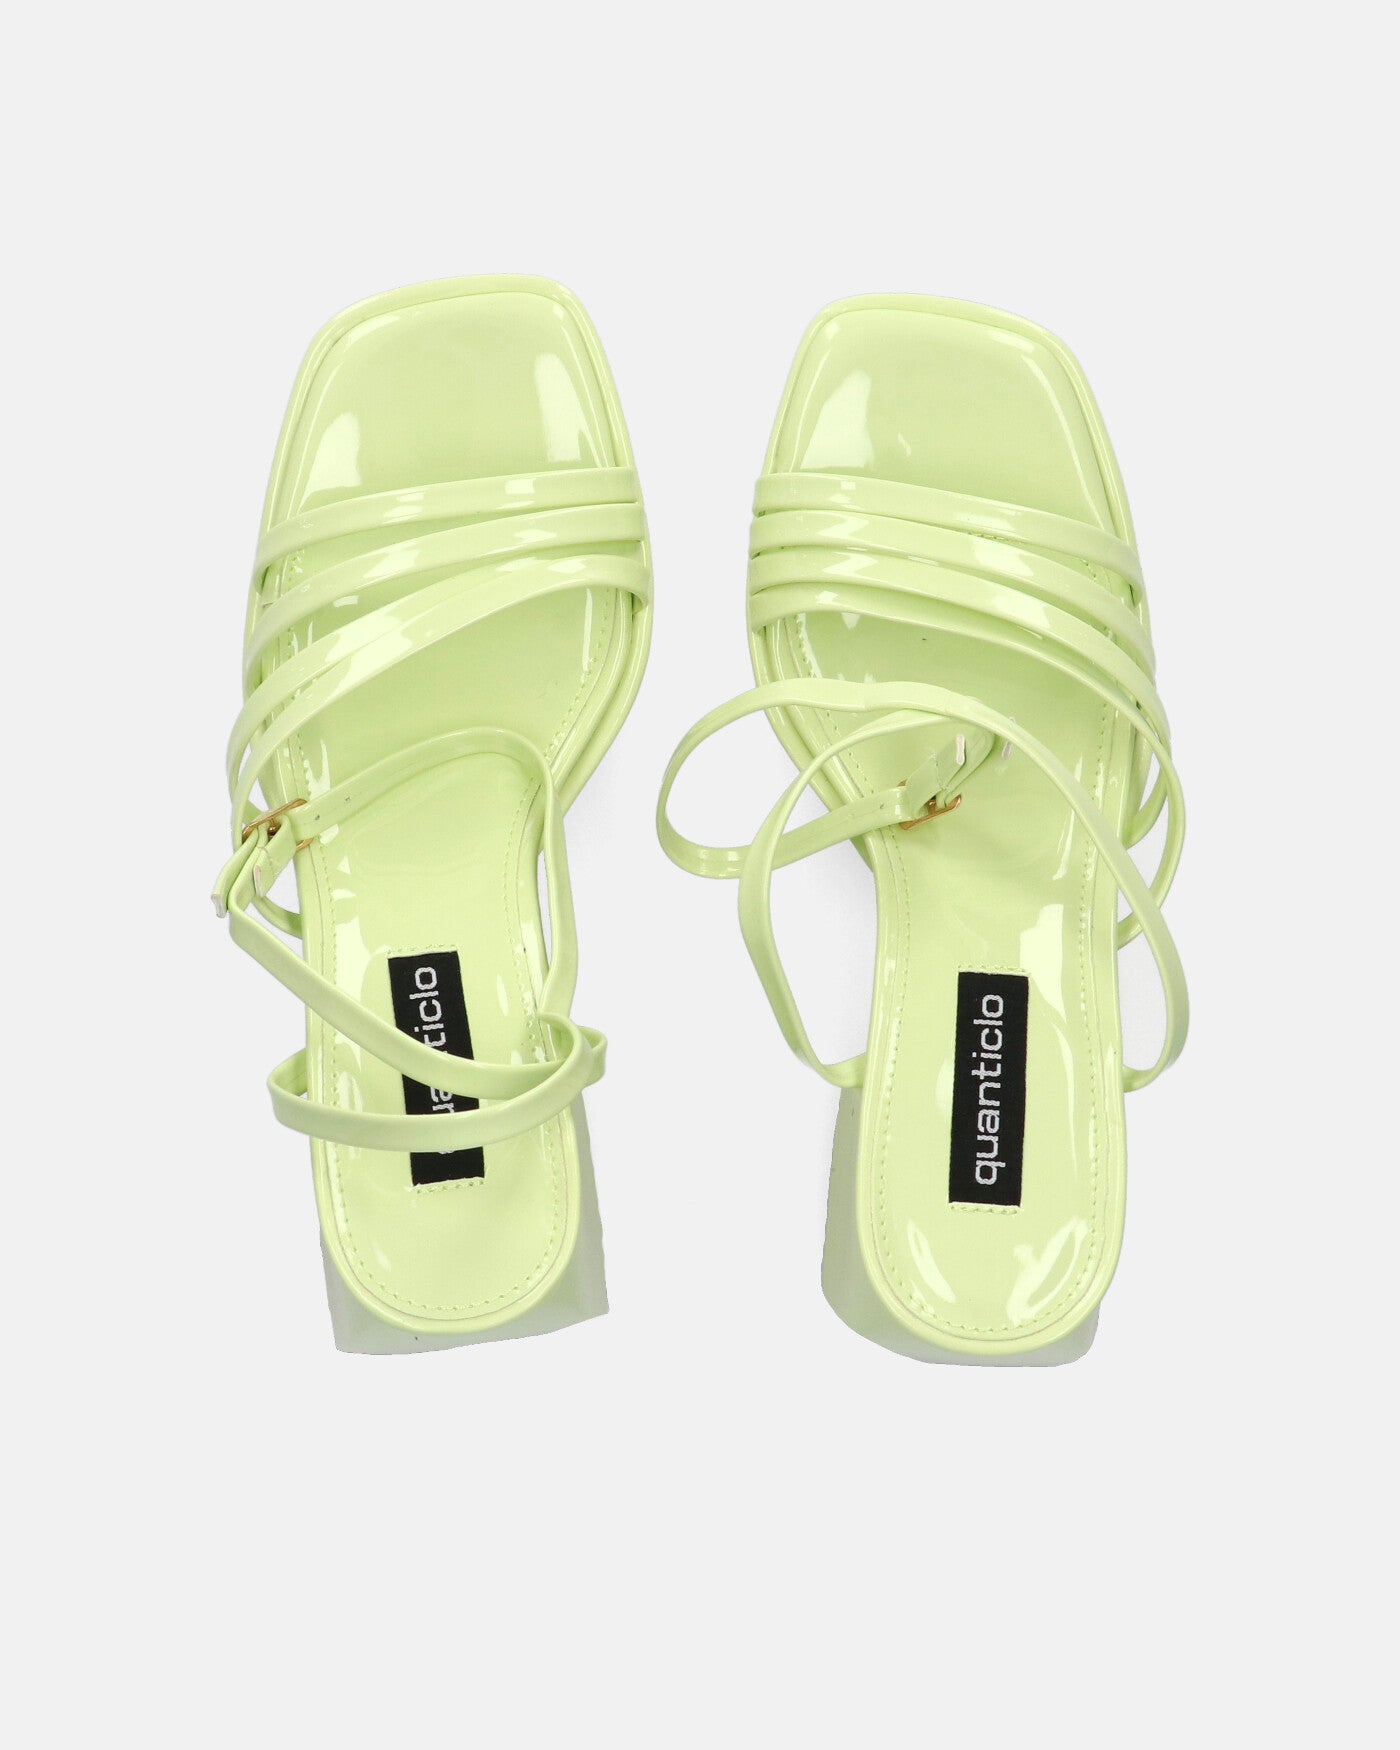 WINONA - light green glassy sandals with squared heel